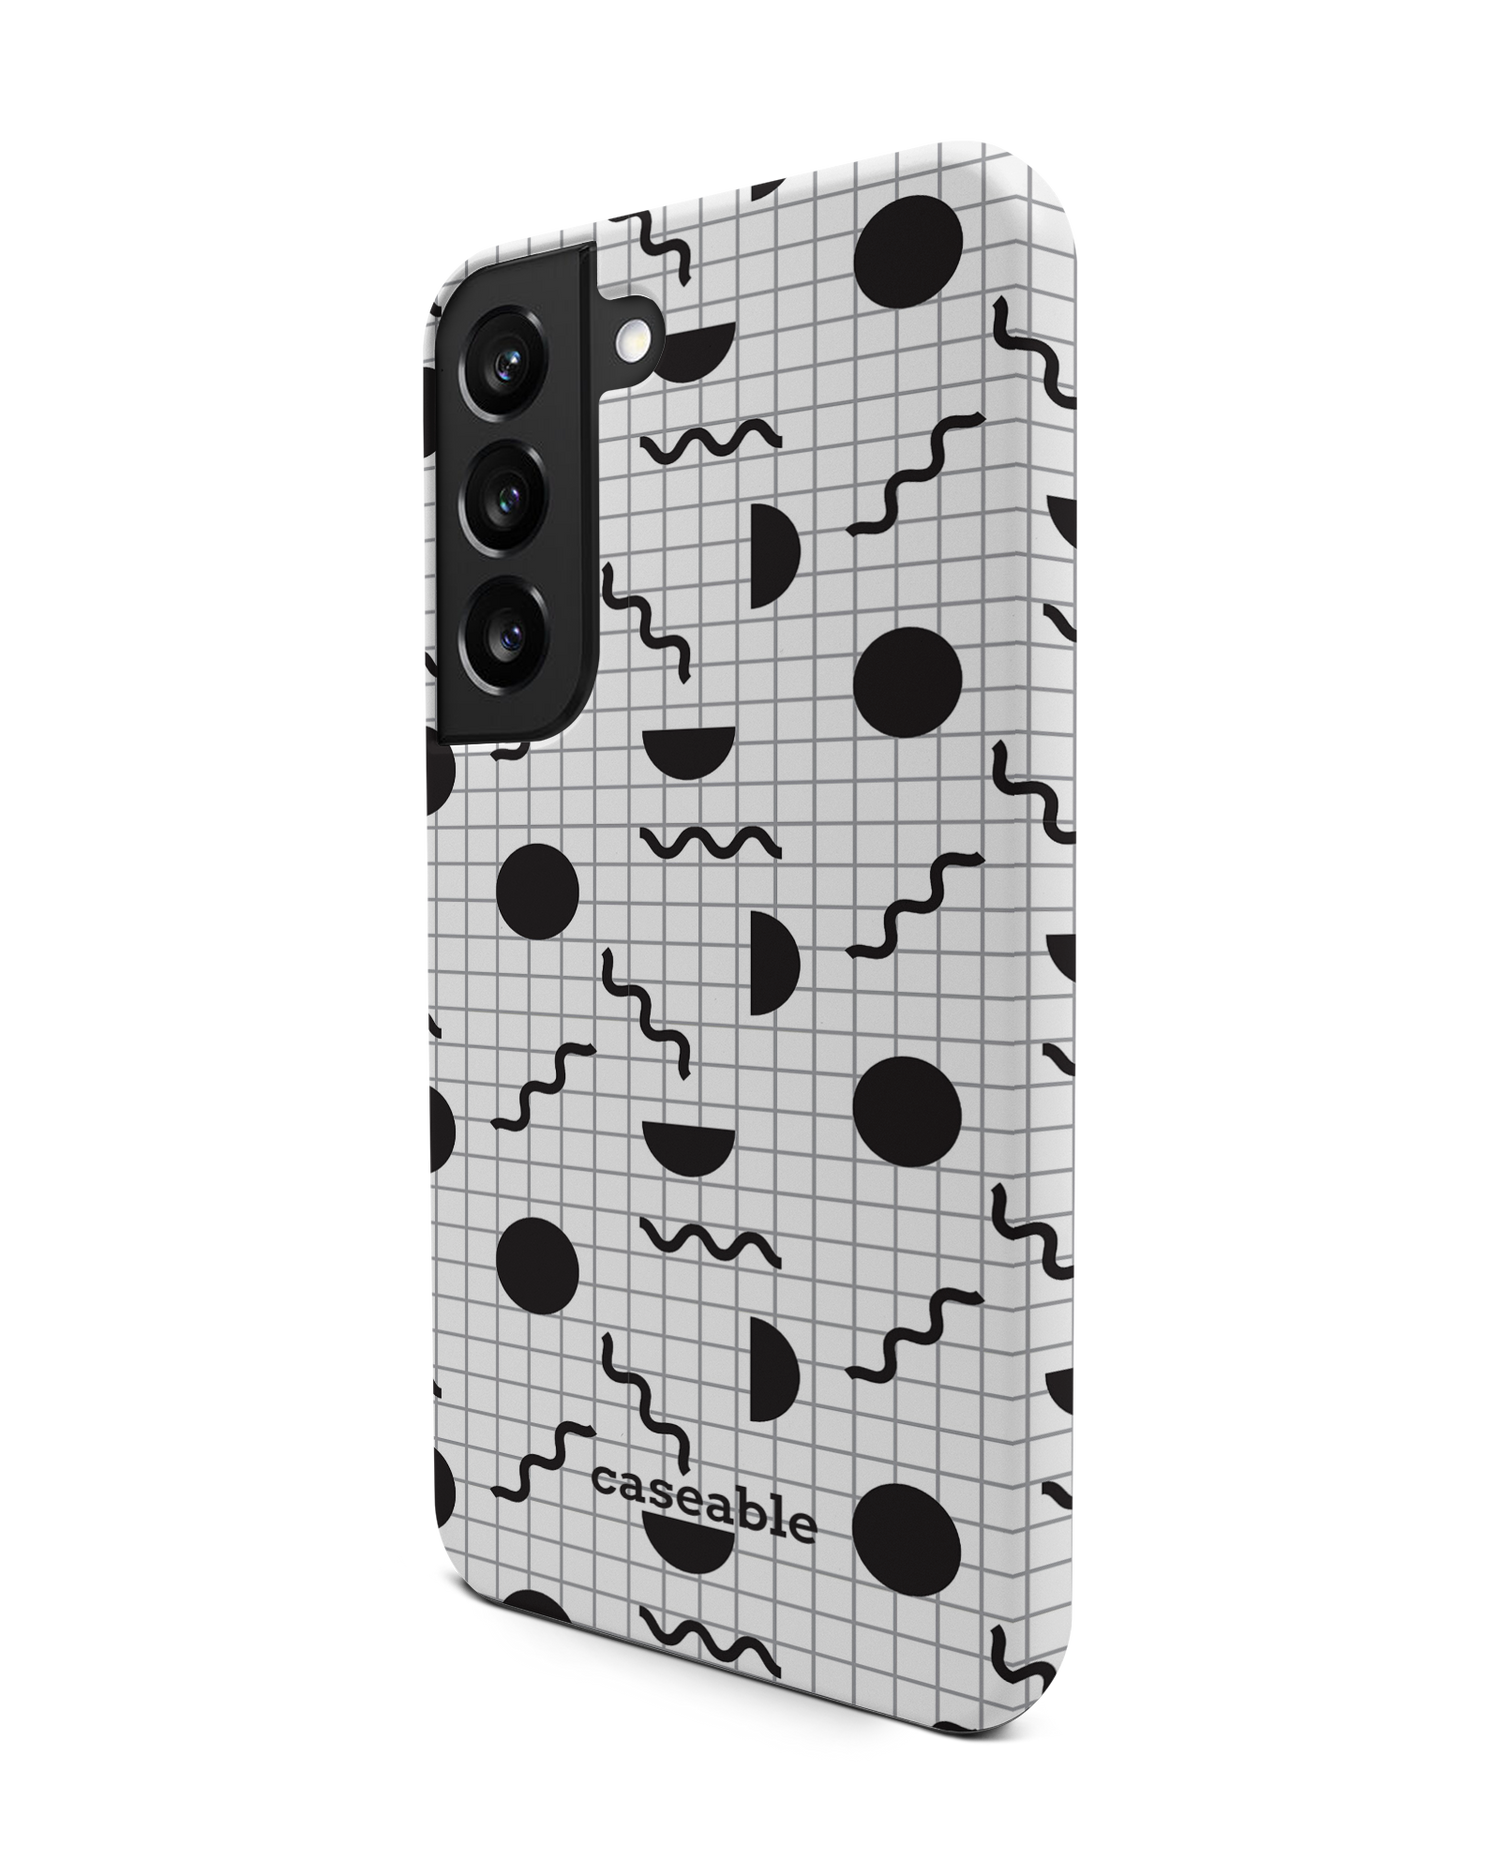 Metric Matter Premium Phone Case Samsung Galaxy S22 5G: View from the right side